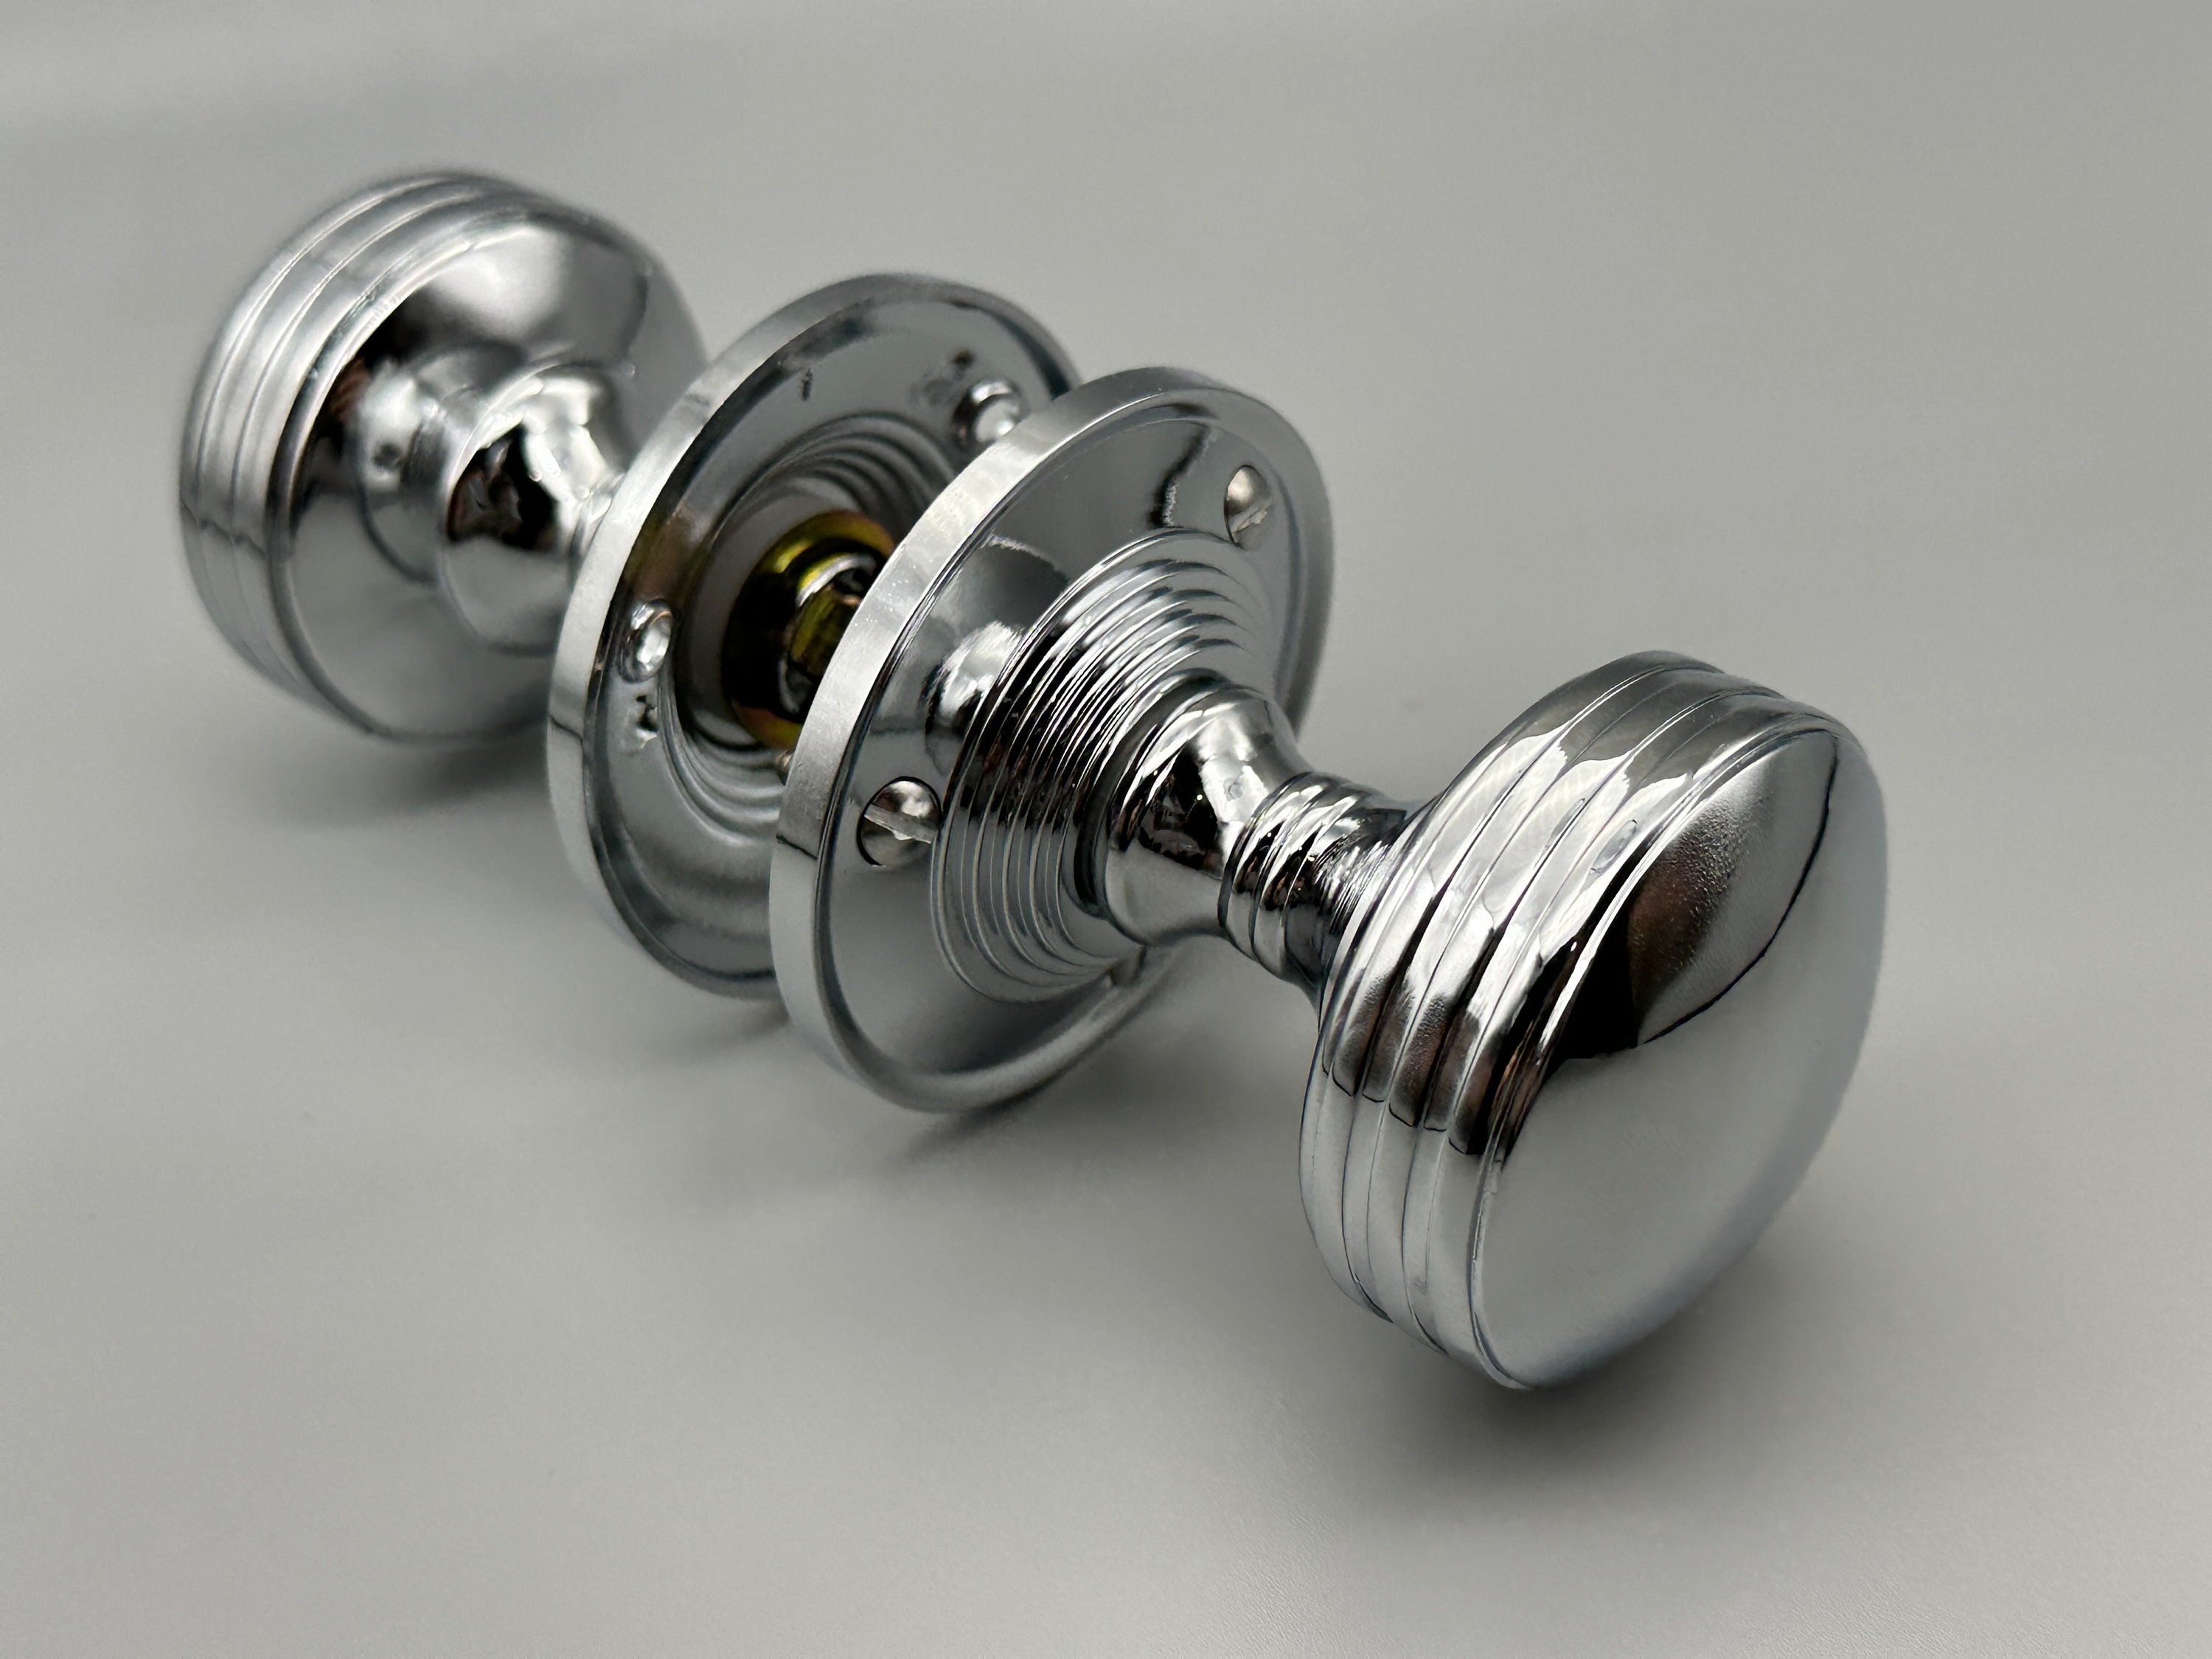 Stunning 55mm Mortice Door Knob Available in Satin & Chrome Finishings -   Canada